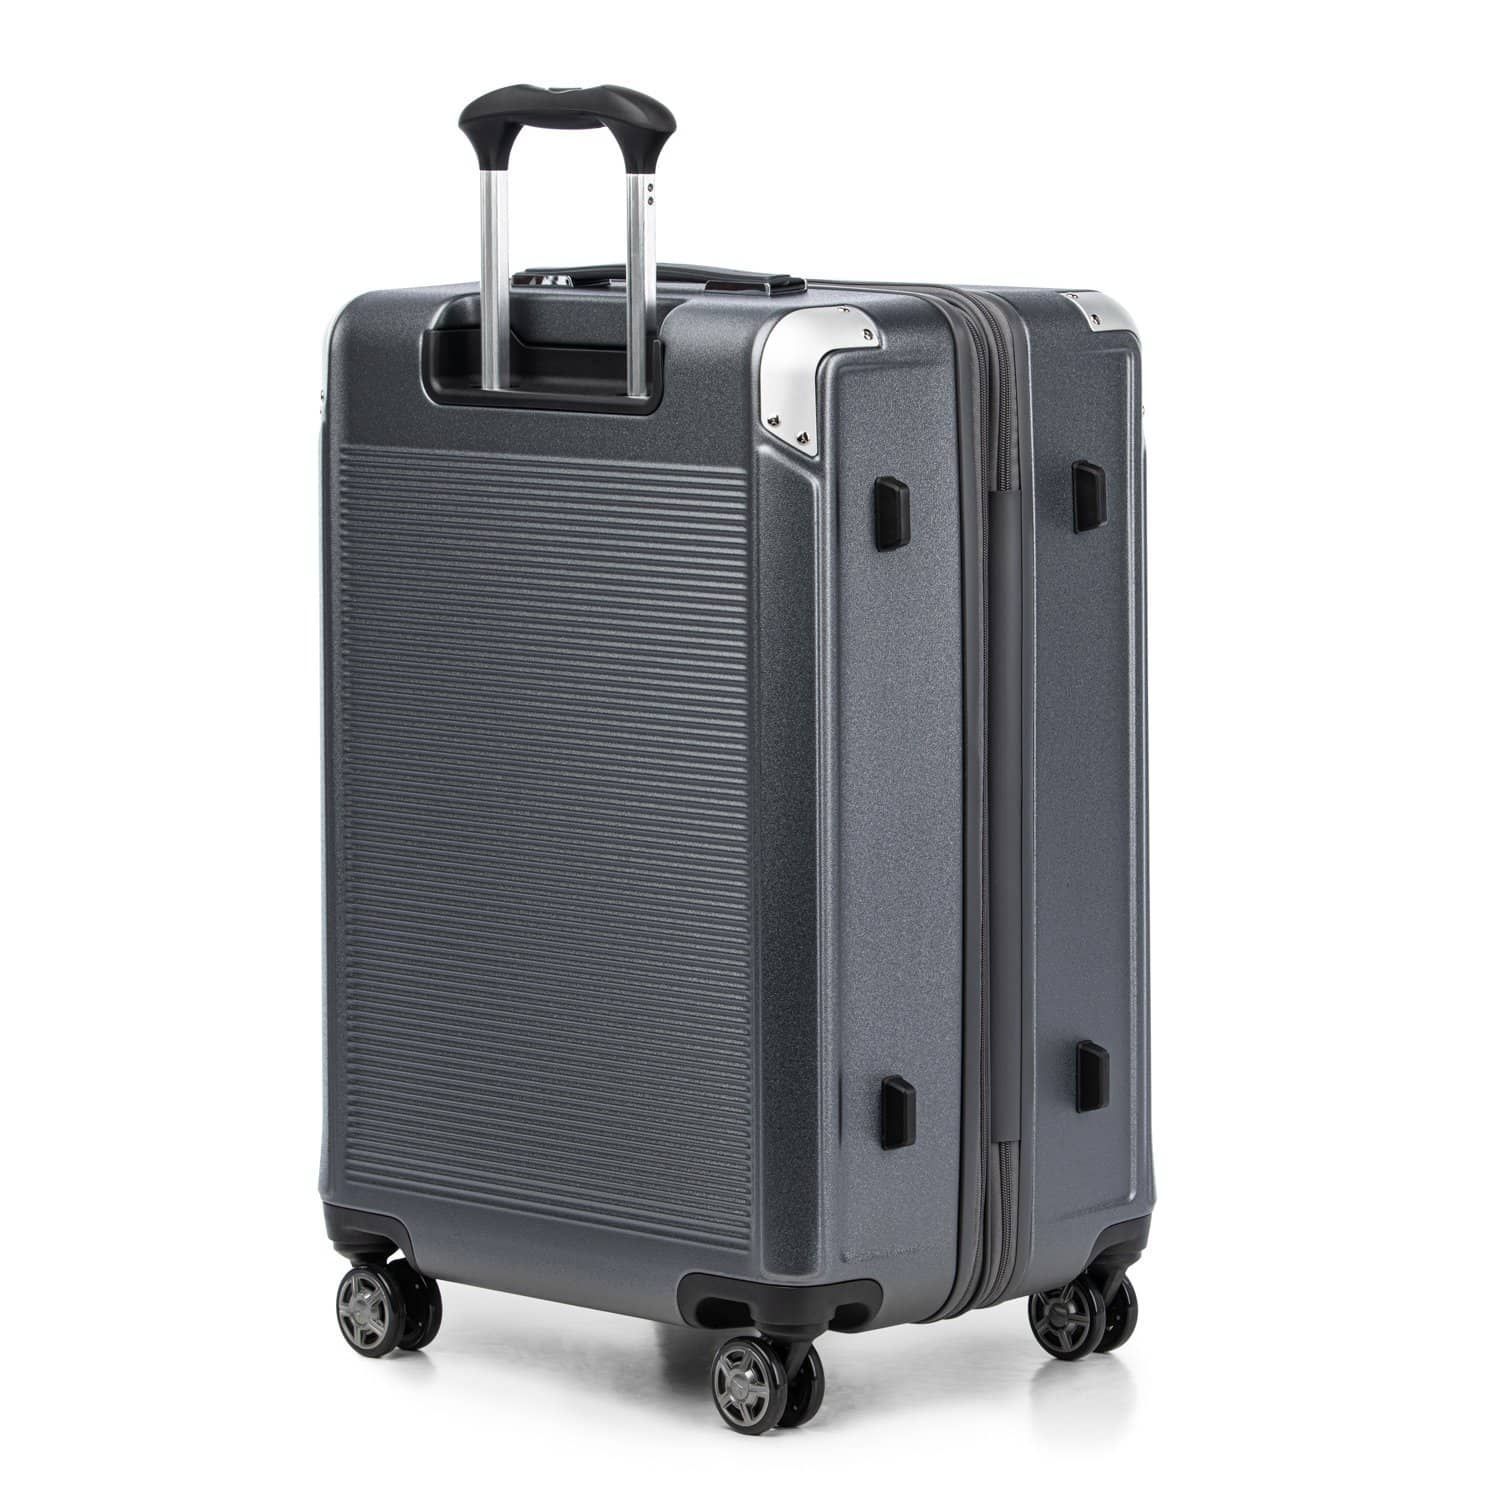 travelpro platinum elite 25 hardside checked luggage metallic gray luggage with silver and black handle black wheels silver aluminum bumpers